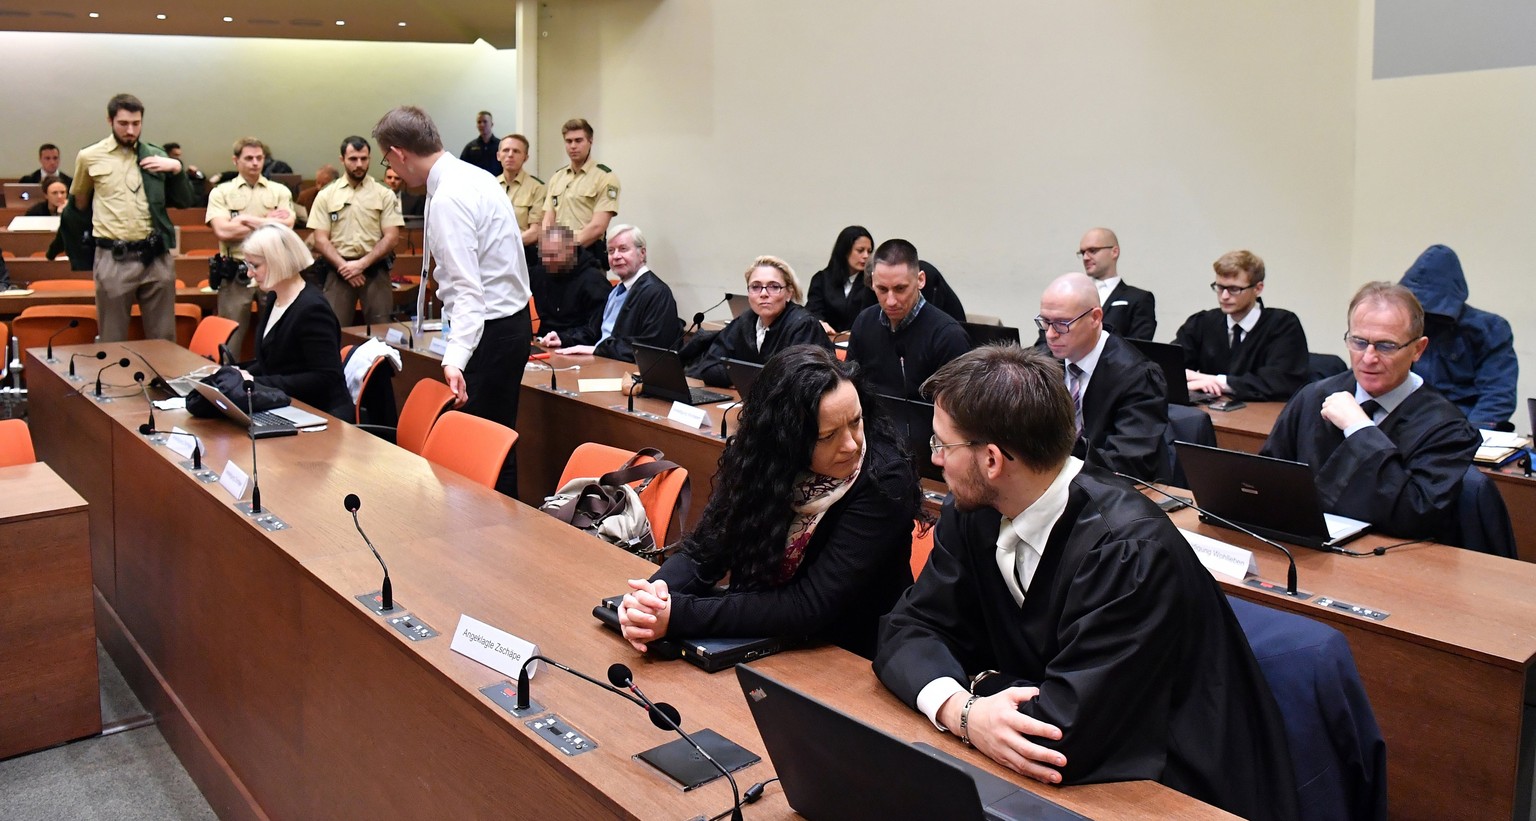 epa06355059 Co-defendant Beate Zschaepe, her lawyer Mathias Grasel (1st row R), and co-defendants Ralf Wohlleben (2nd row C) and Andre E. (2nd row L) and Carsten S. (3rd row R) wait for the start of t ...